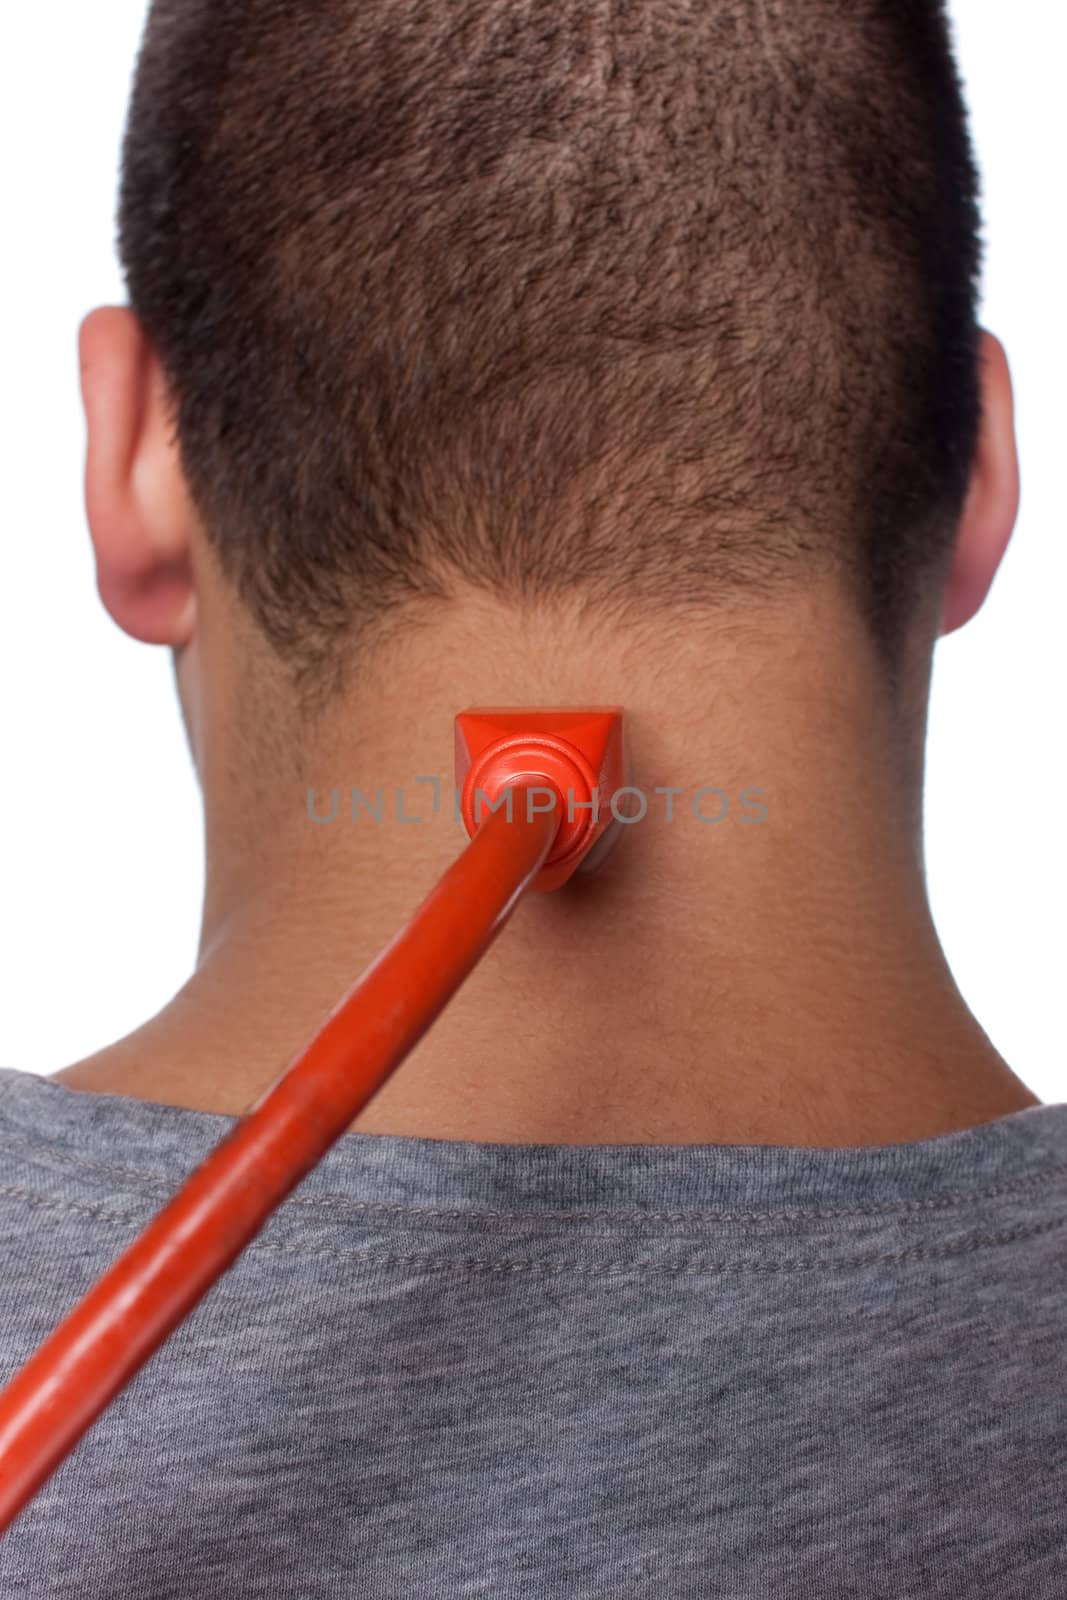 Conceptual image of a young man with an electrical cord plugged into electrical socket on the back of his neck.